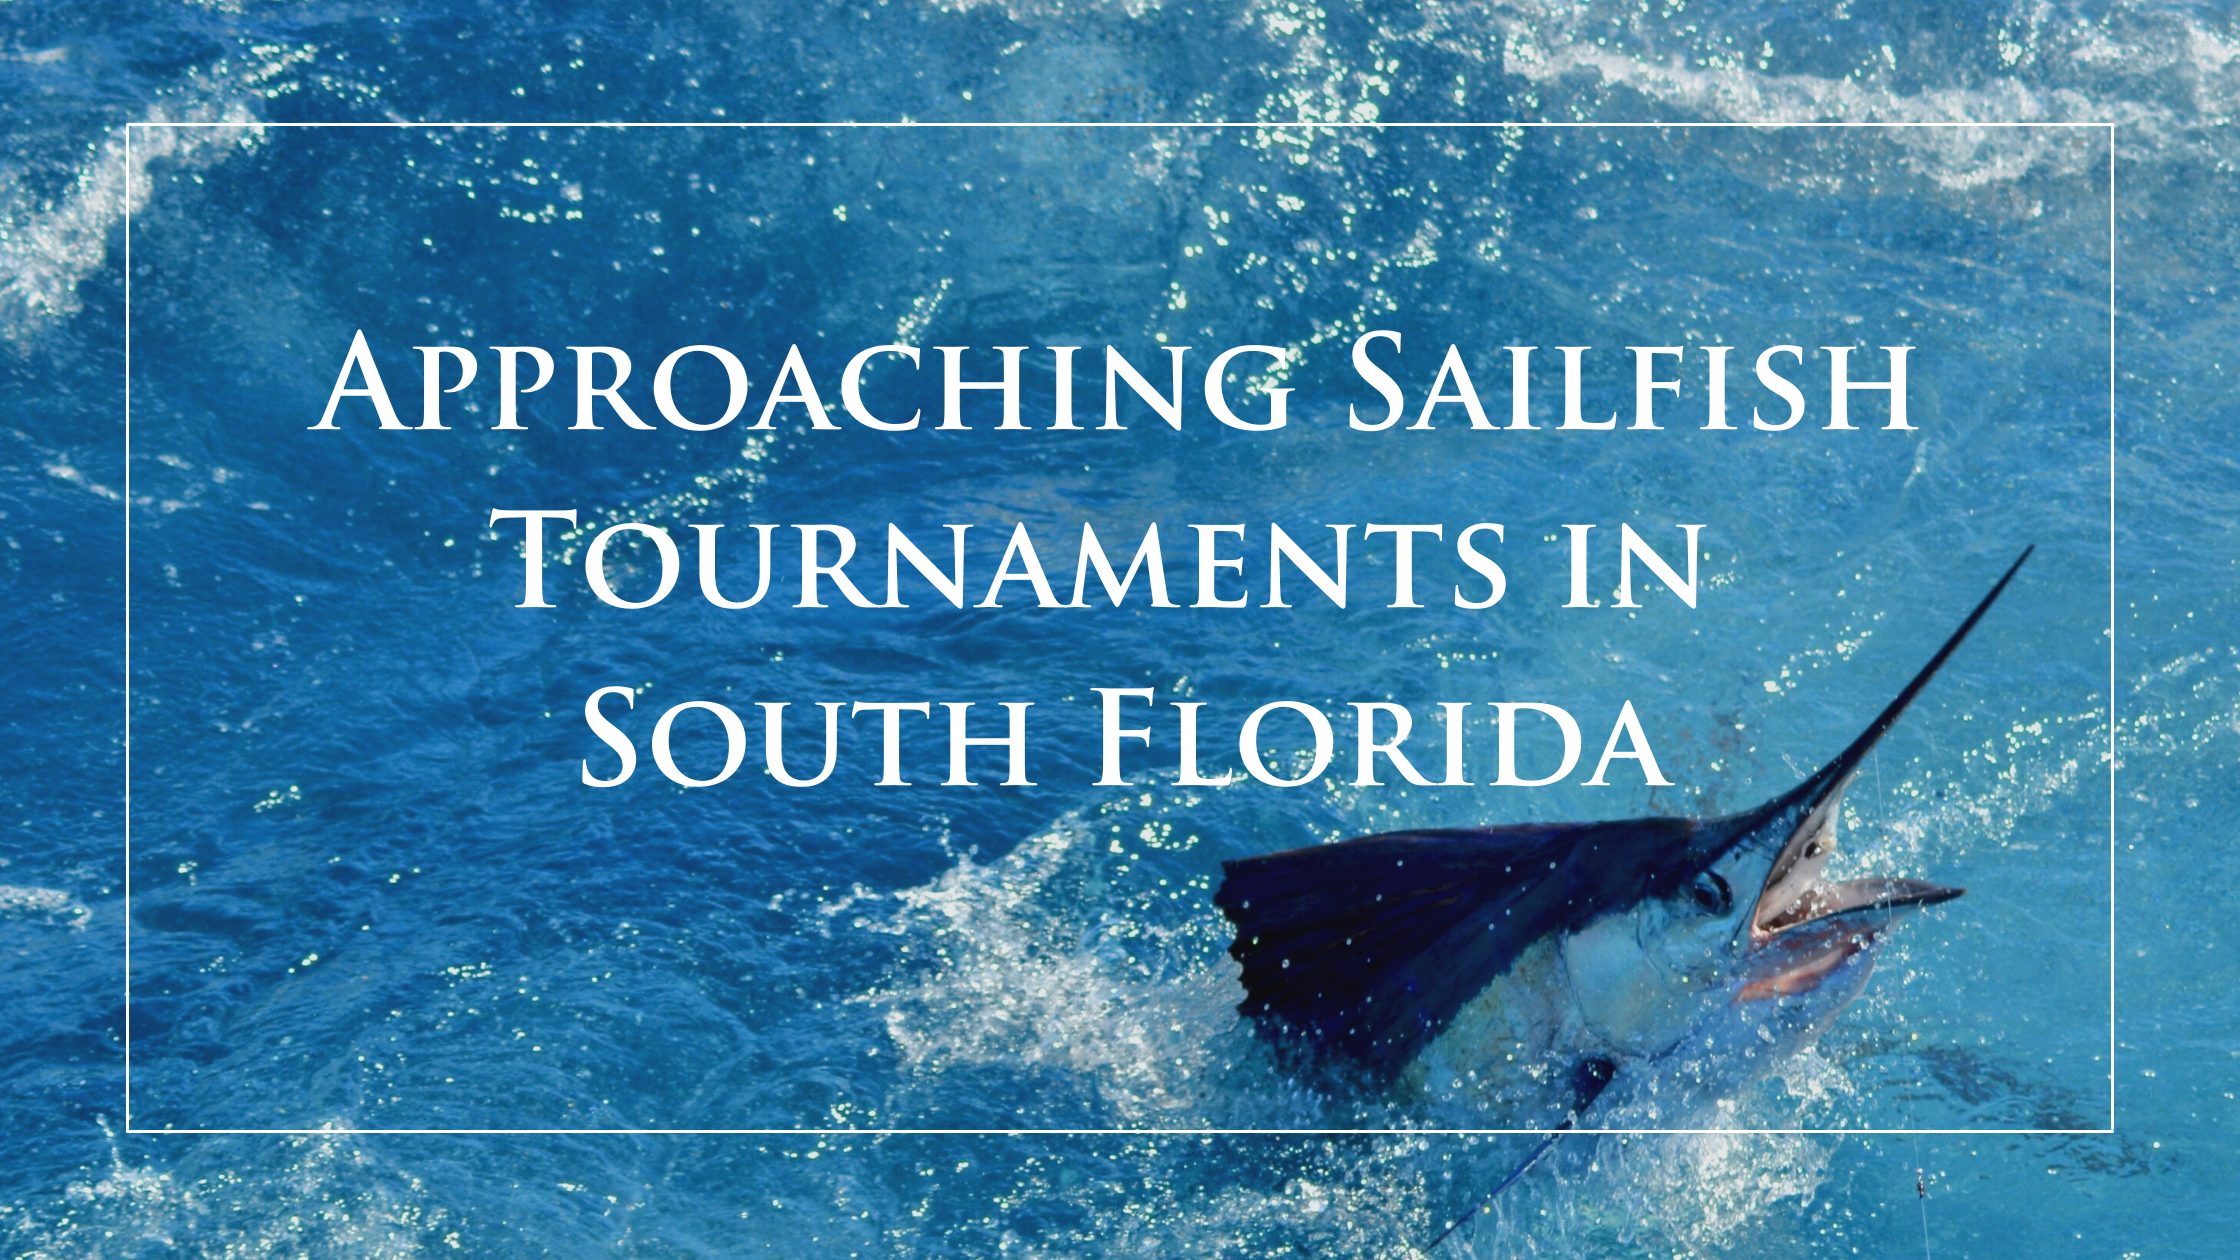 Approaching Sailfish Tournaments in South Florida